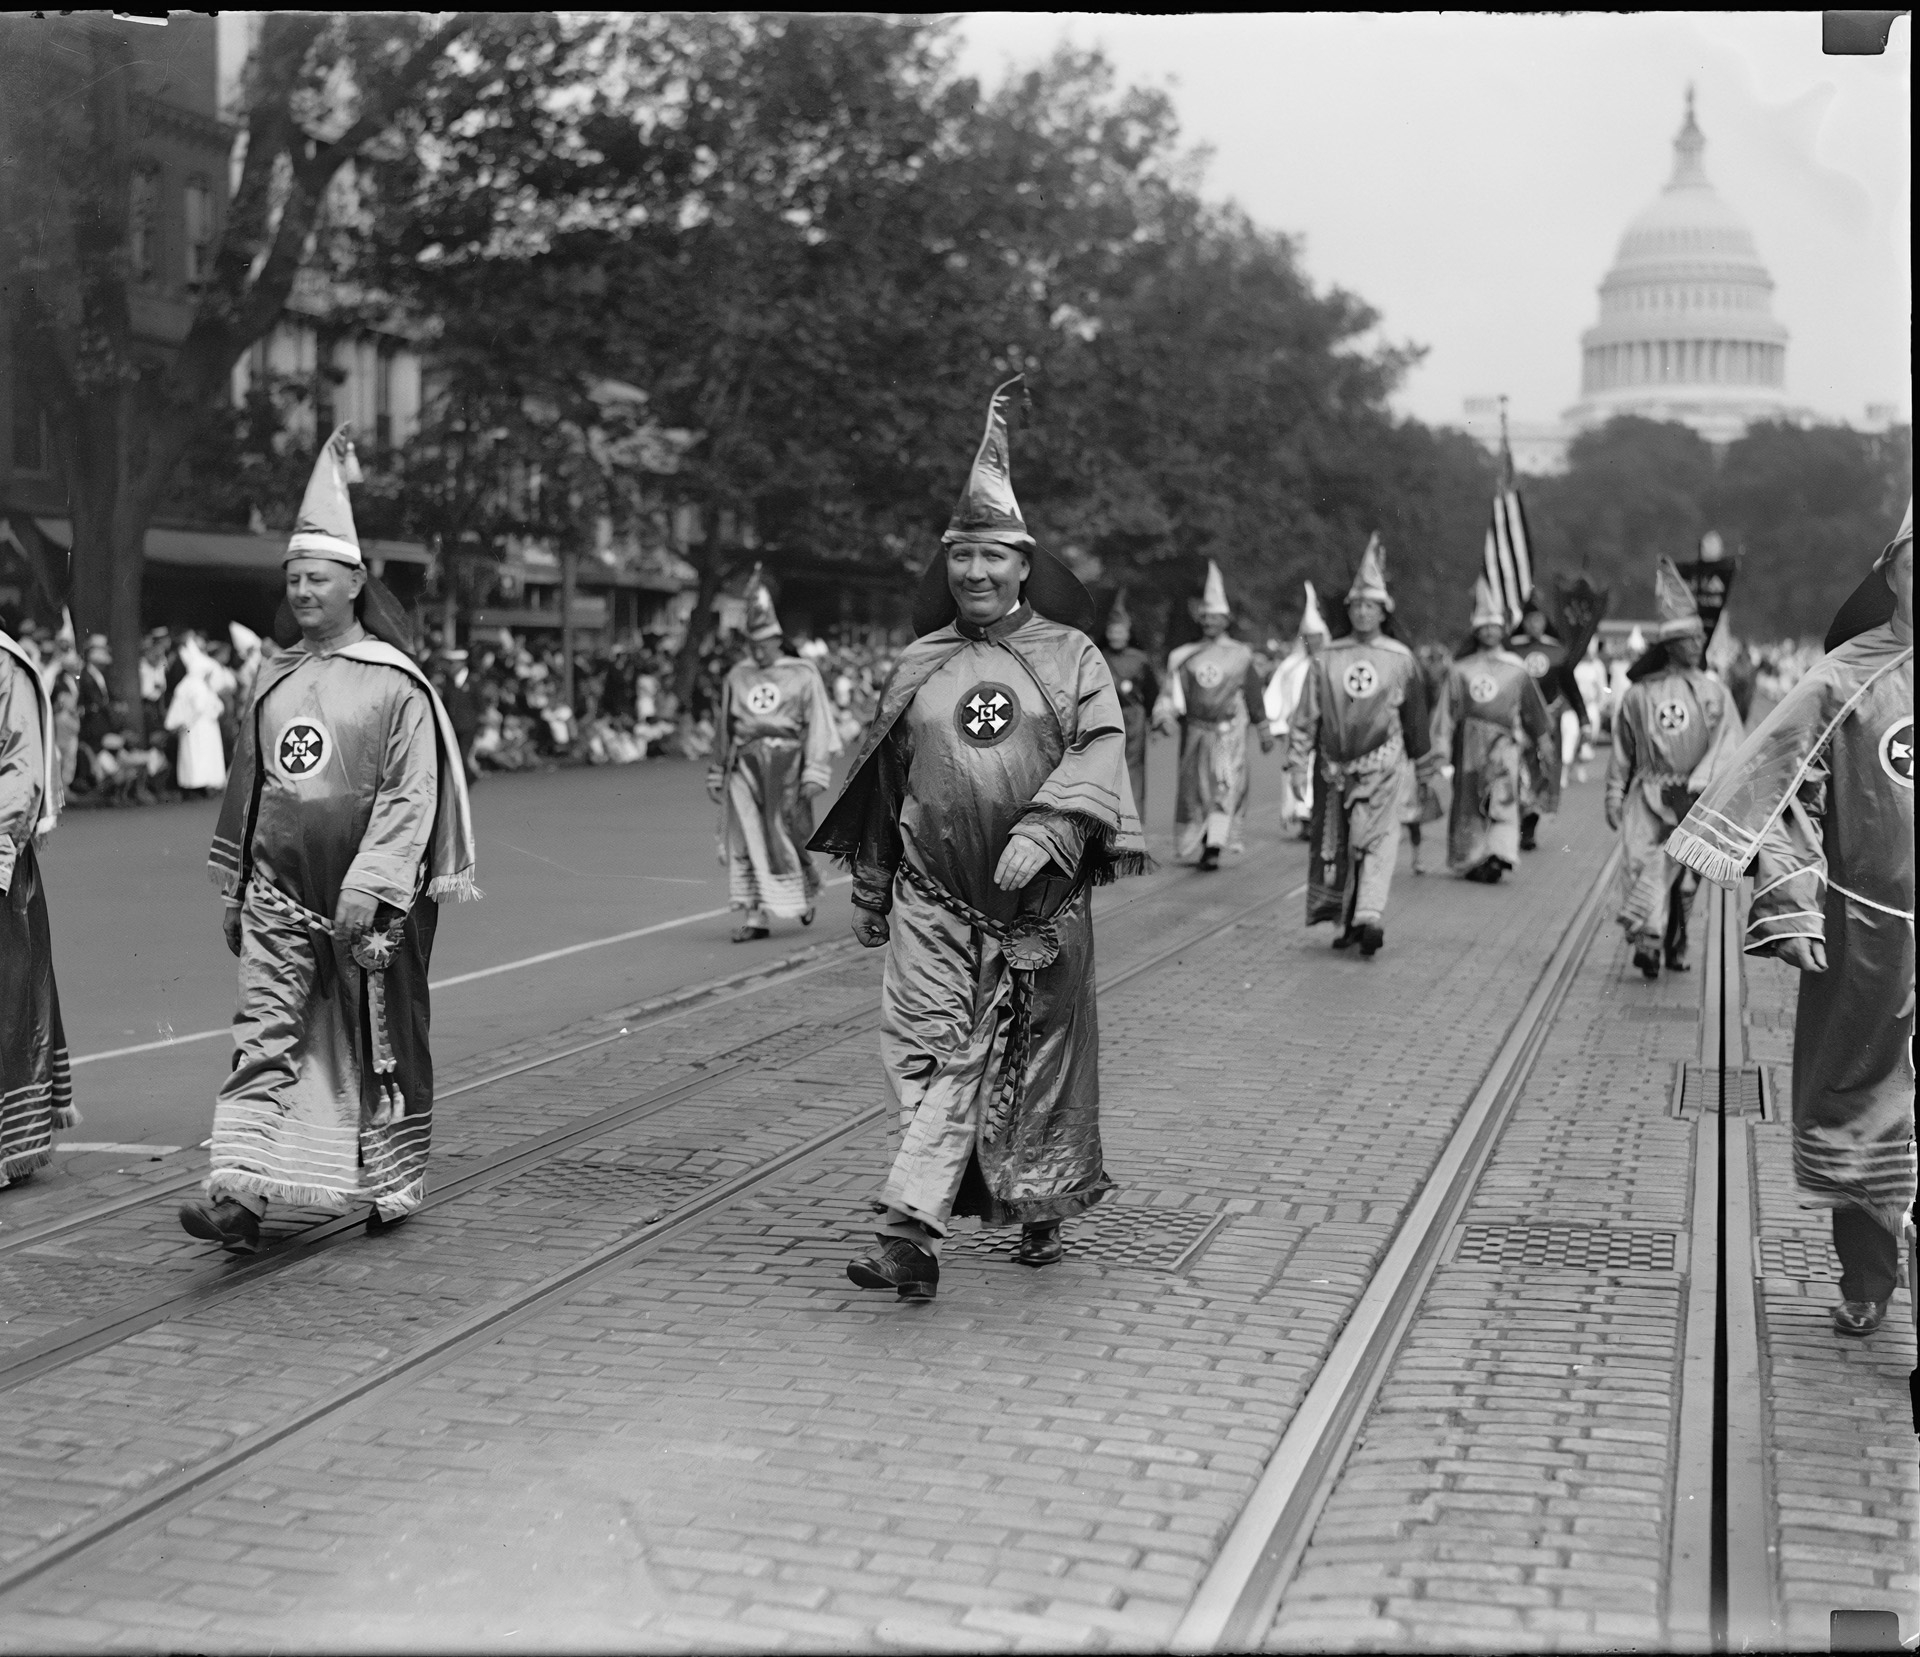 In 1925, 30,000 members of the Ku Klux Klan marched in segregated Washington, DC. The next year hosted 15,000 marchers. Many marchers revealed their face with no fear of legal consequences for the group's terrorism and murder.